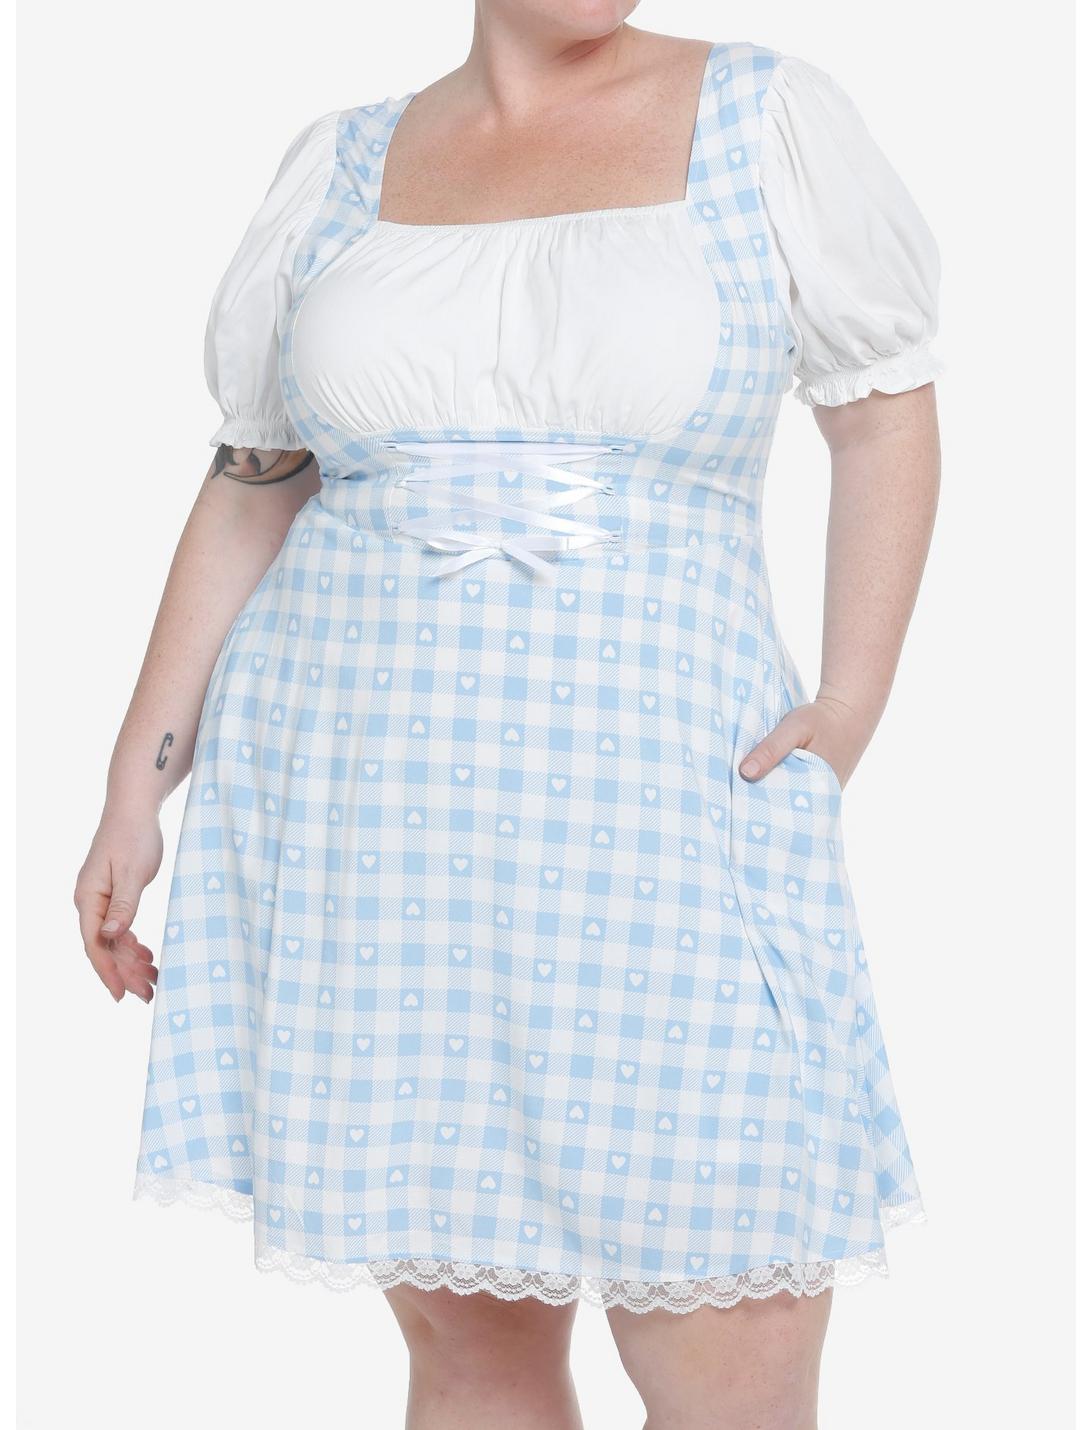 Sweet Society Blue & White Gingham Corset Dress Plus Size, GINGHAM CHECK, hi-res